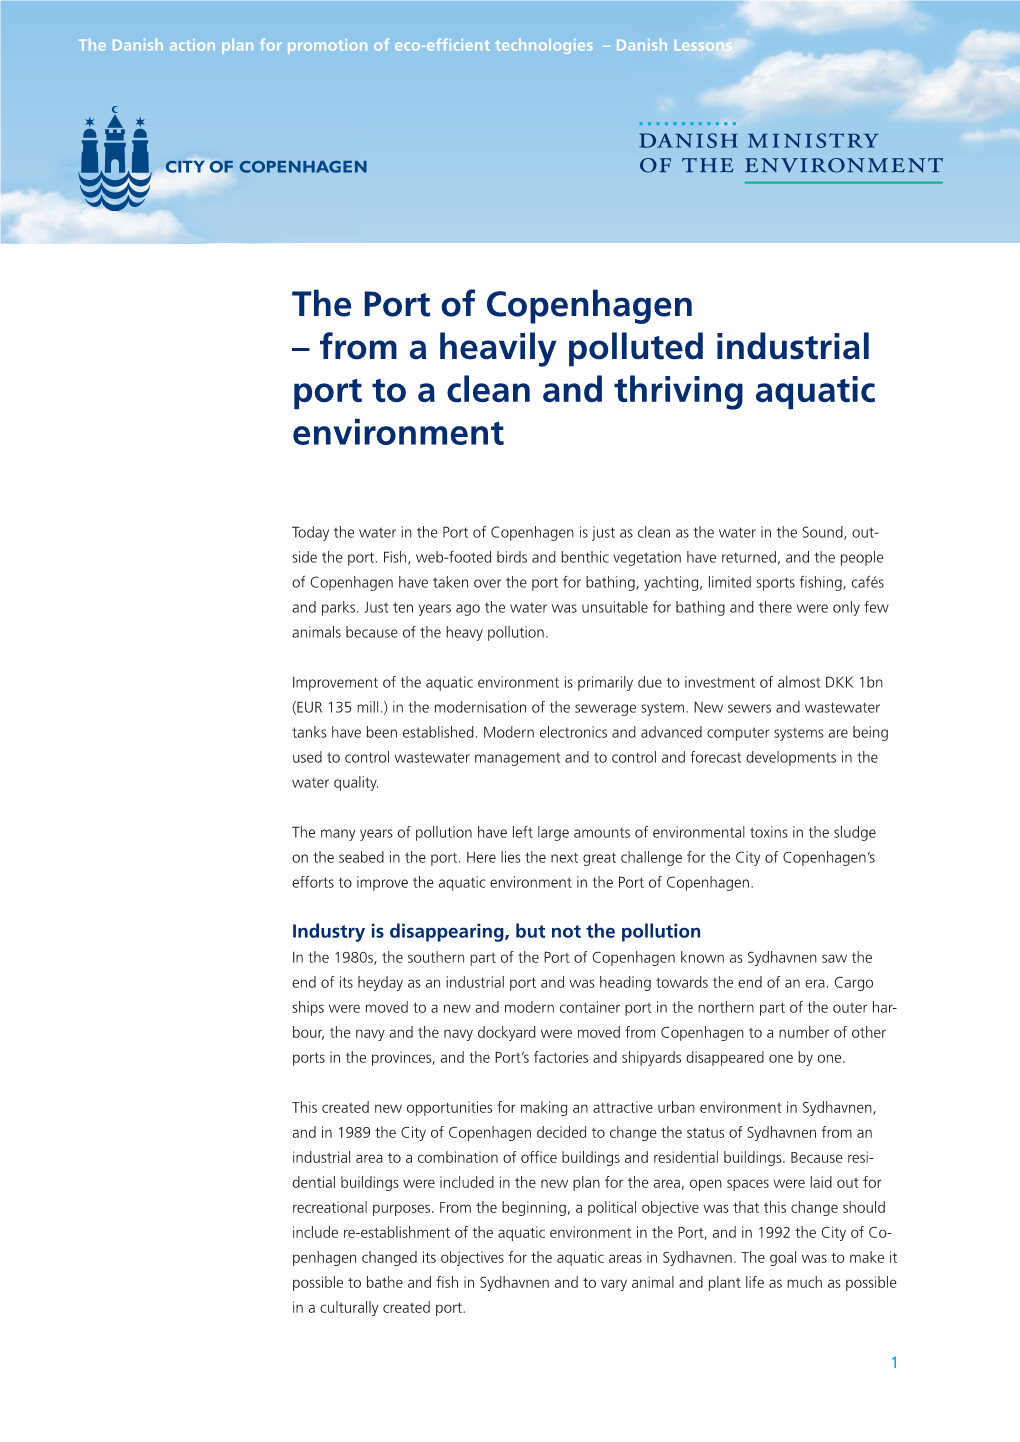 The Port of Copenhagen – from a Heavily Polluted Industrial Port to a Clean and Thriving Aquatic Environment